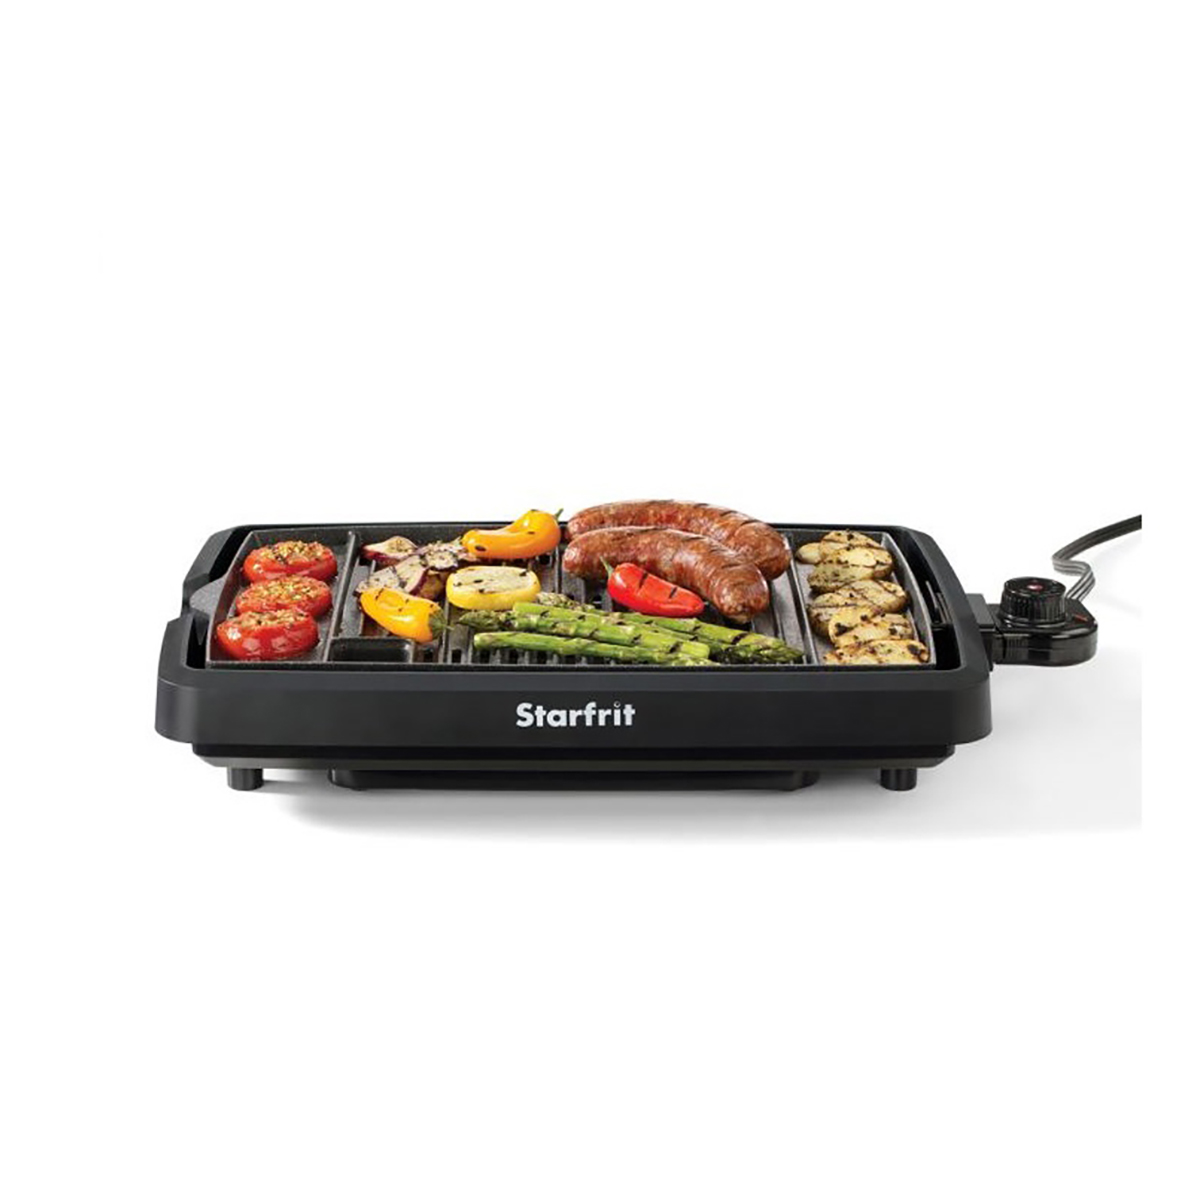 Open Video Modal for Starfrit Smokeless Indoor Grill